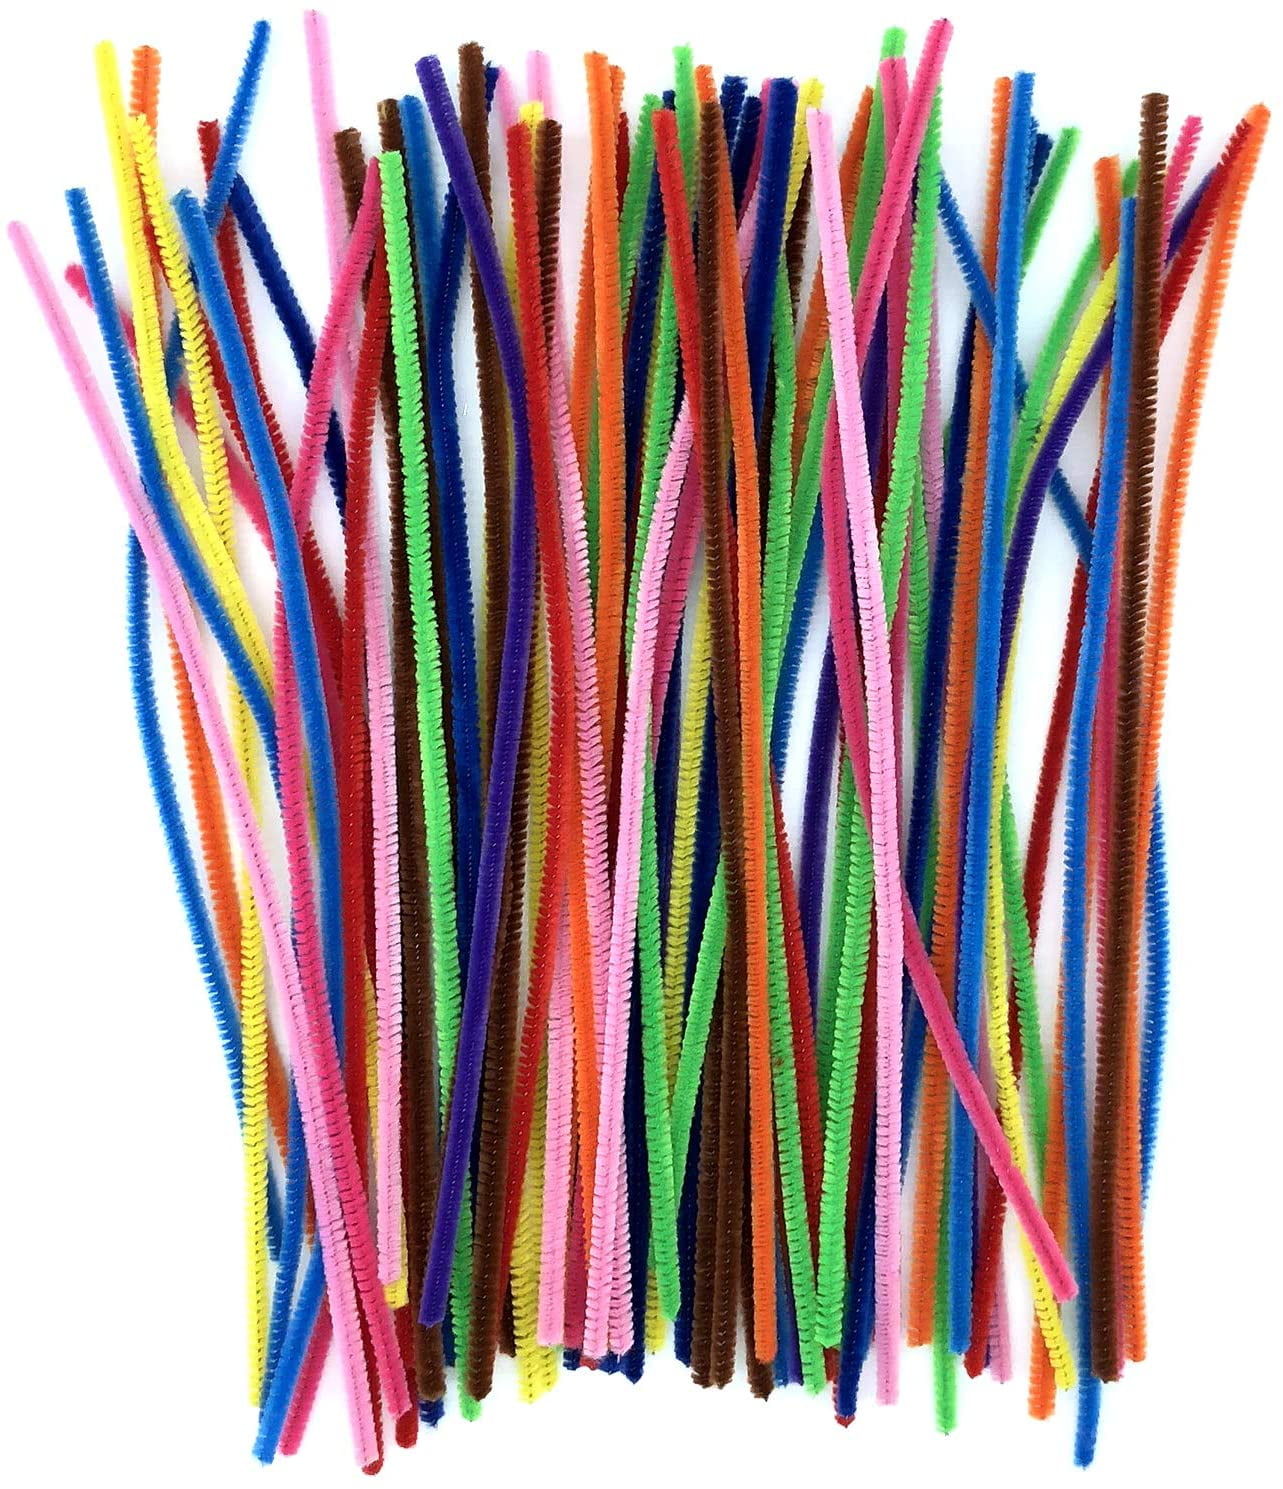 Glue Stick 100 Pcs Chenille Stems Pipe Cleaners Light Brown 100 Pcs Colorful Bump Pipe Cleaners and Pompoms Pipe Cleaners DIY Craft Set for Creative Handmade DIY Art Craft 